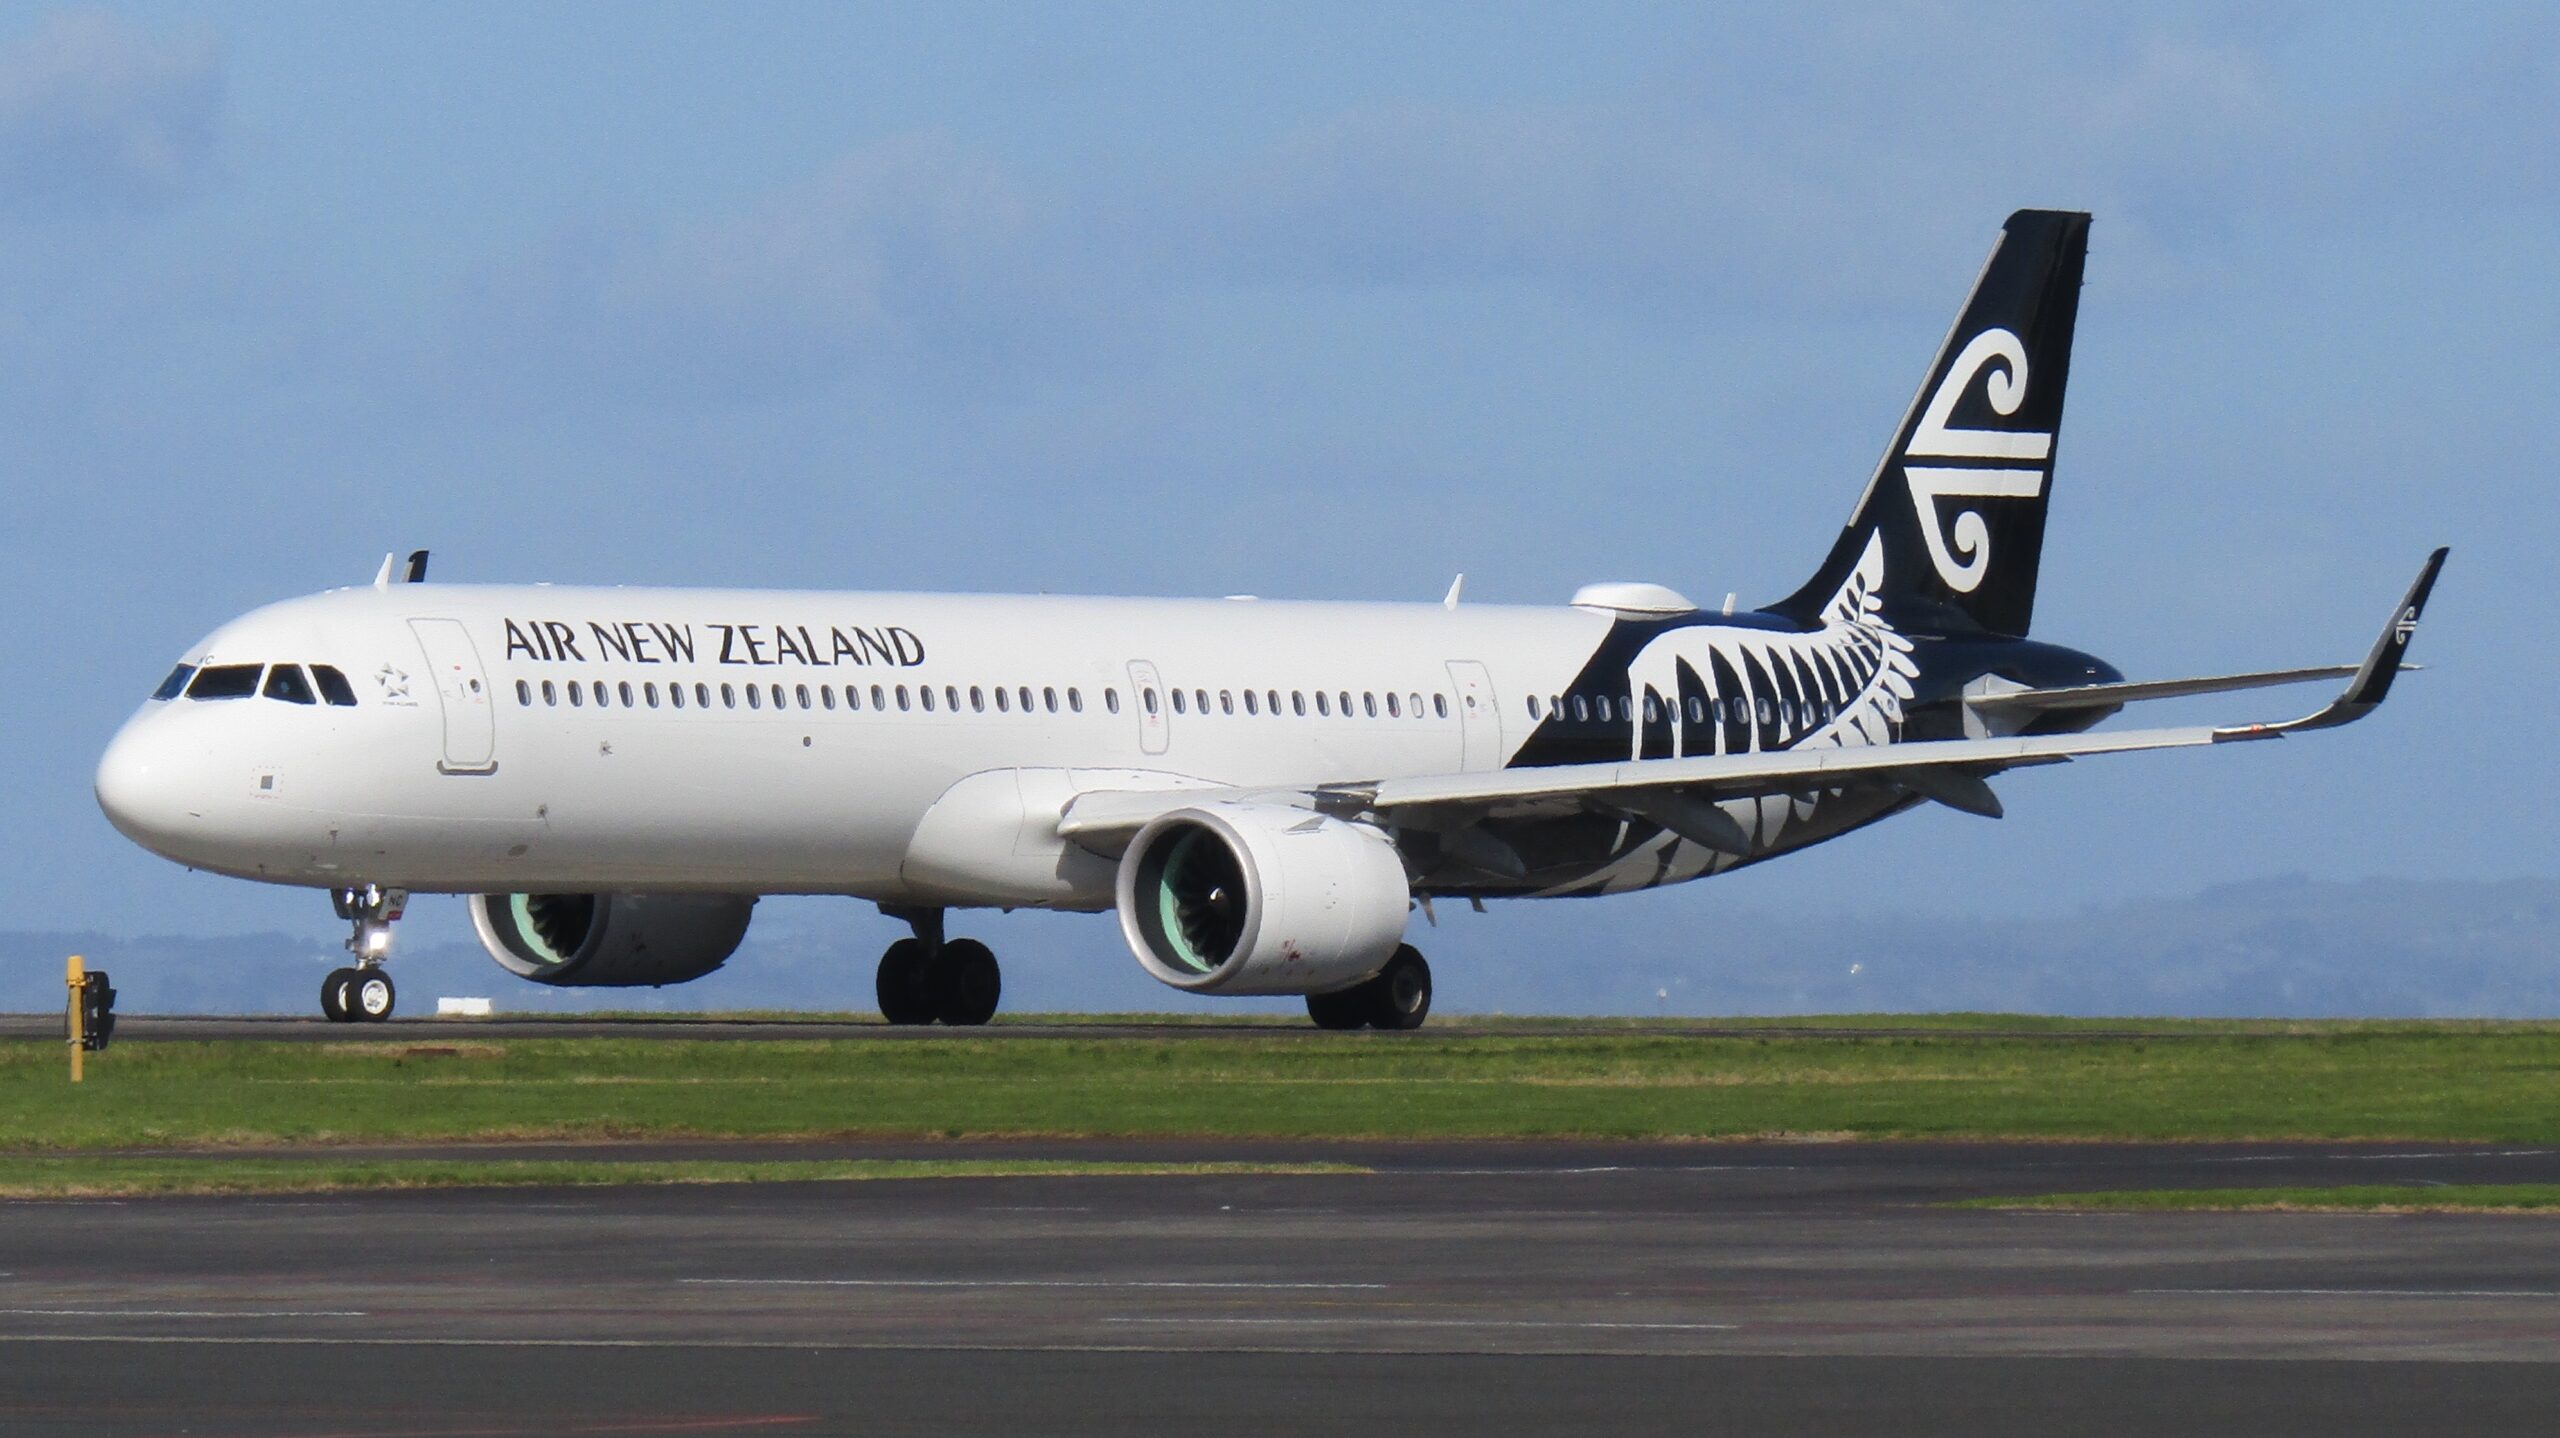 An Air New Zealand Airbus on the runway.